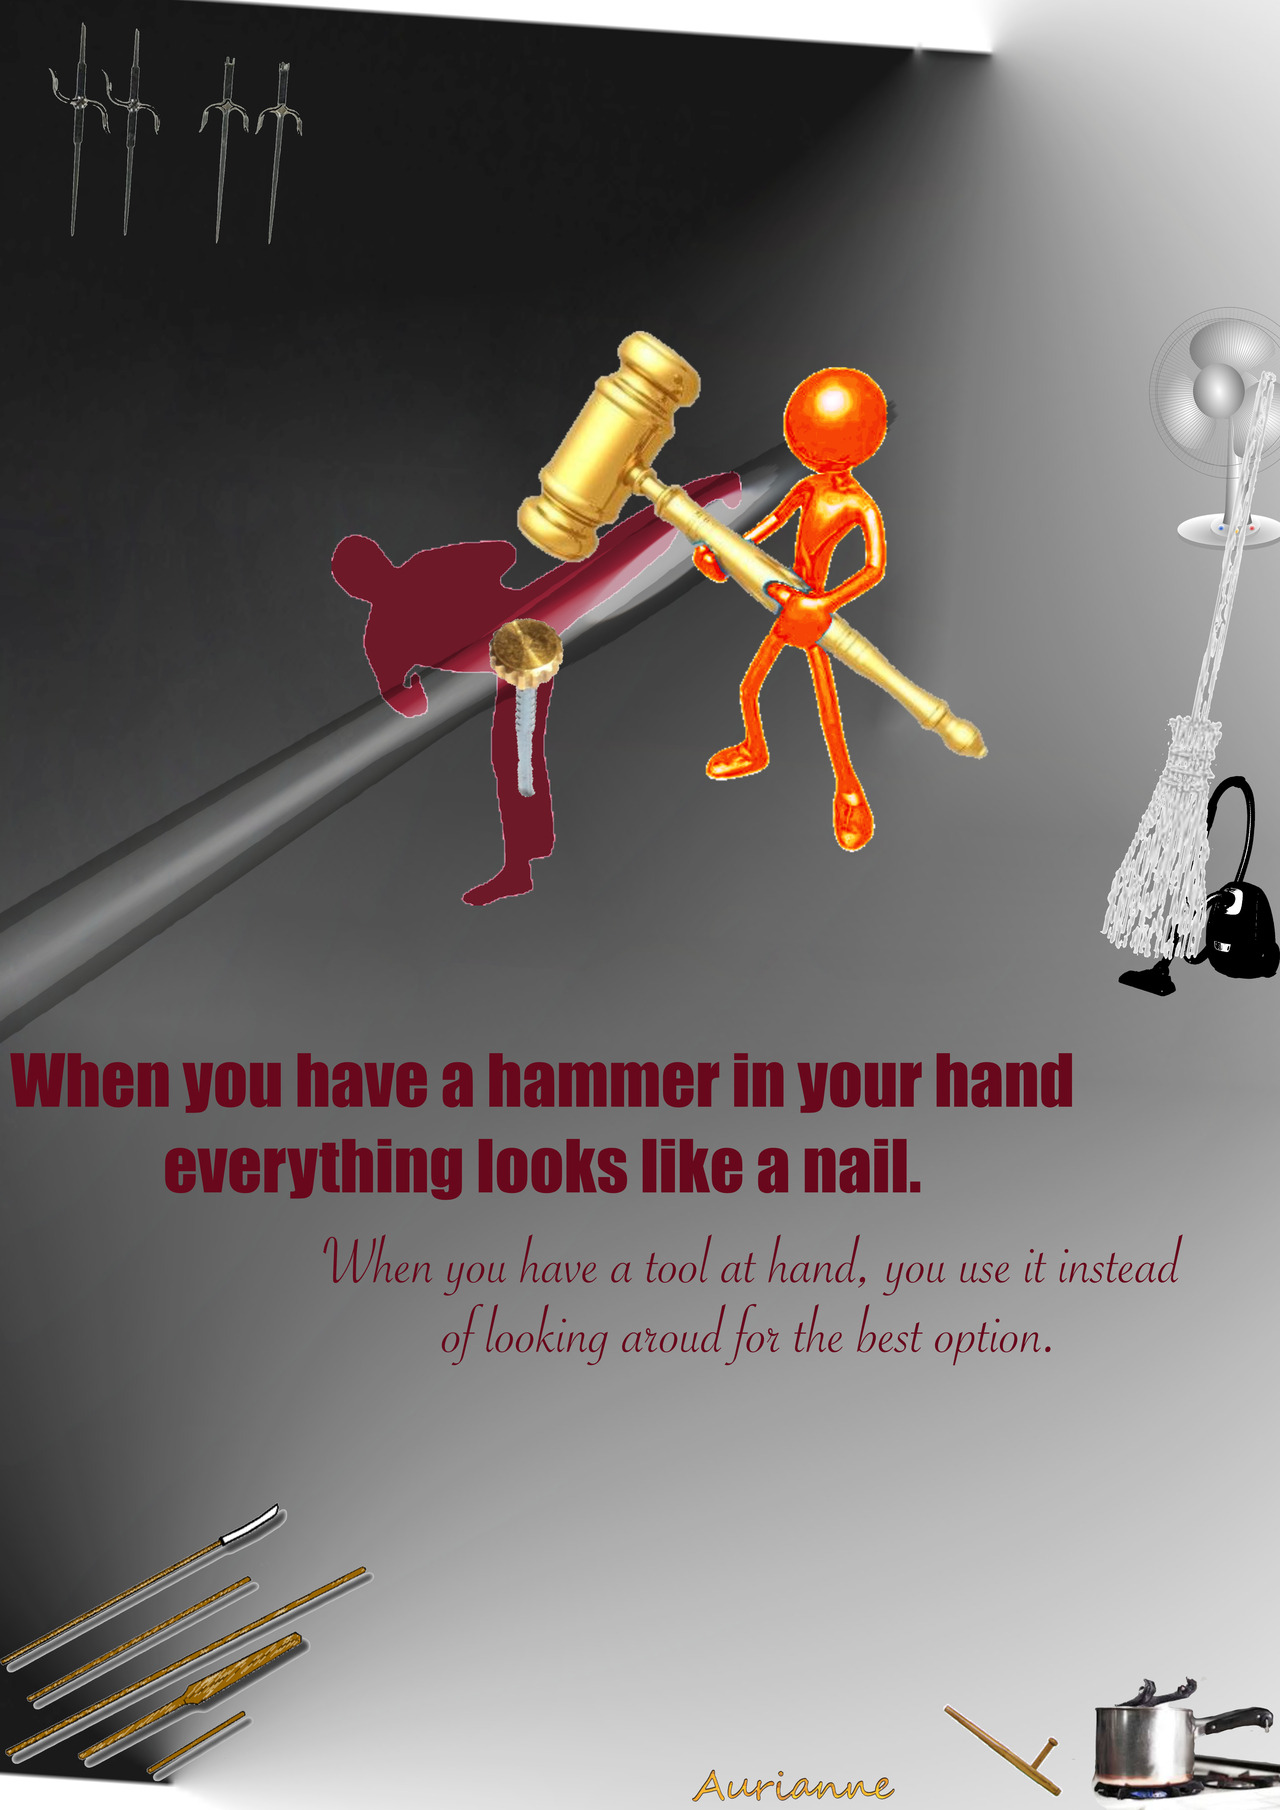 When you have a hammer in your hand everything looks like a nail.